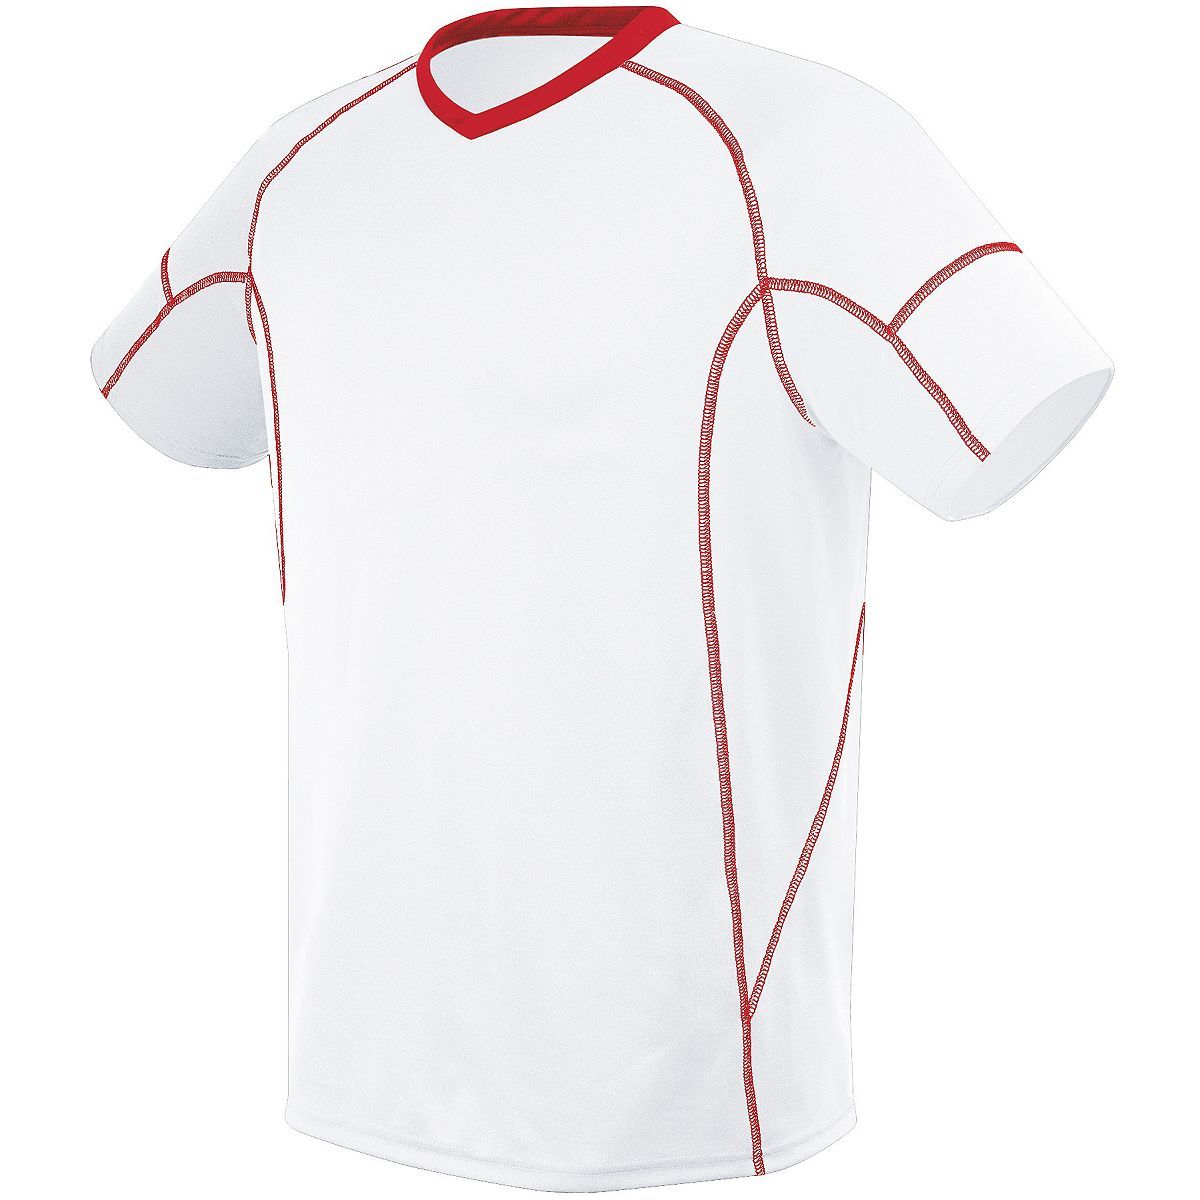 Youth Kinetic Jersey 322821